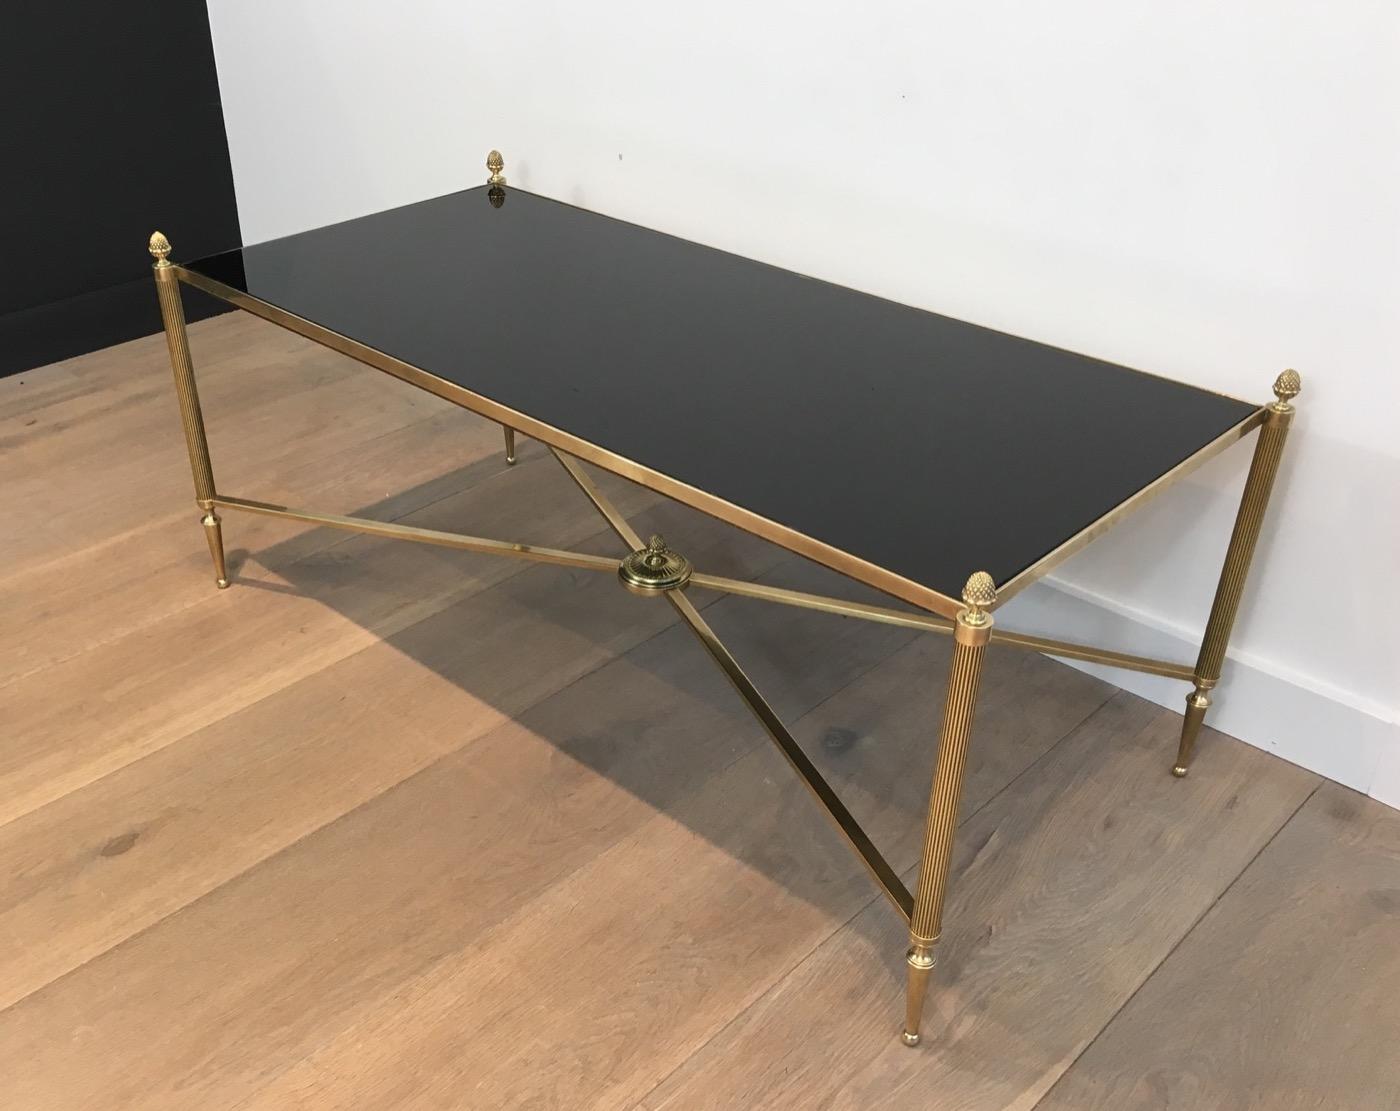 This neoclassical style coffee table is all made of brass with a black lacquered glass on top. This is a work by famous French designer Maison Bagués, circa 1940.